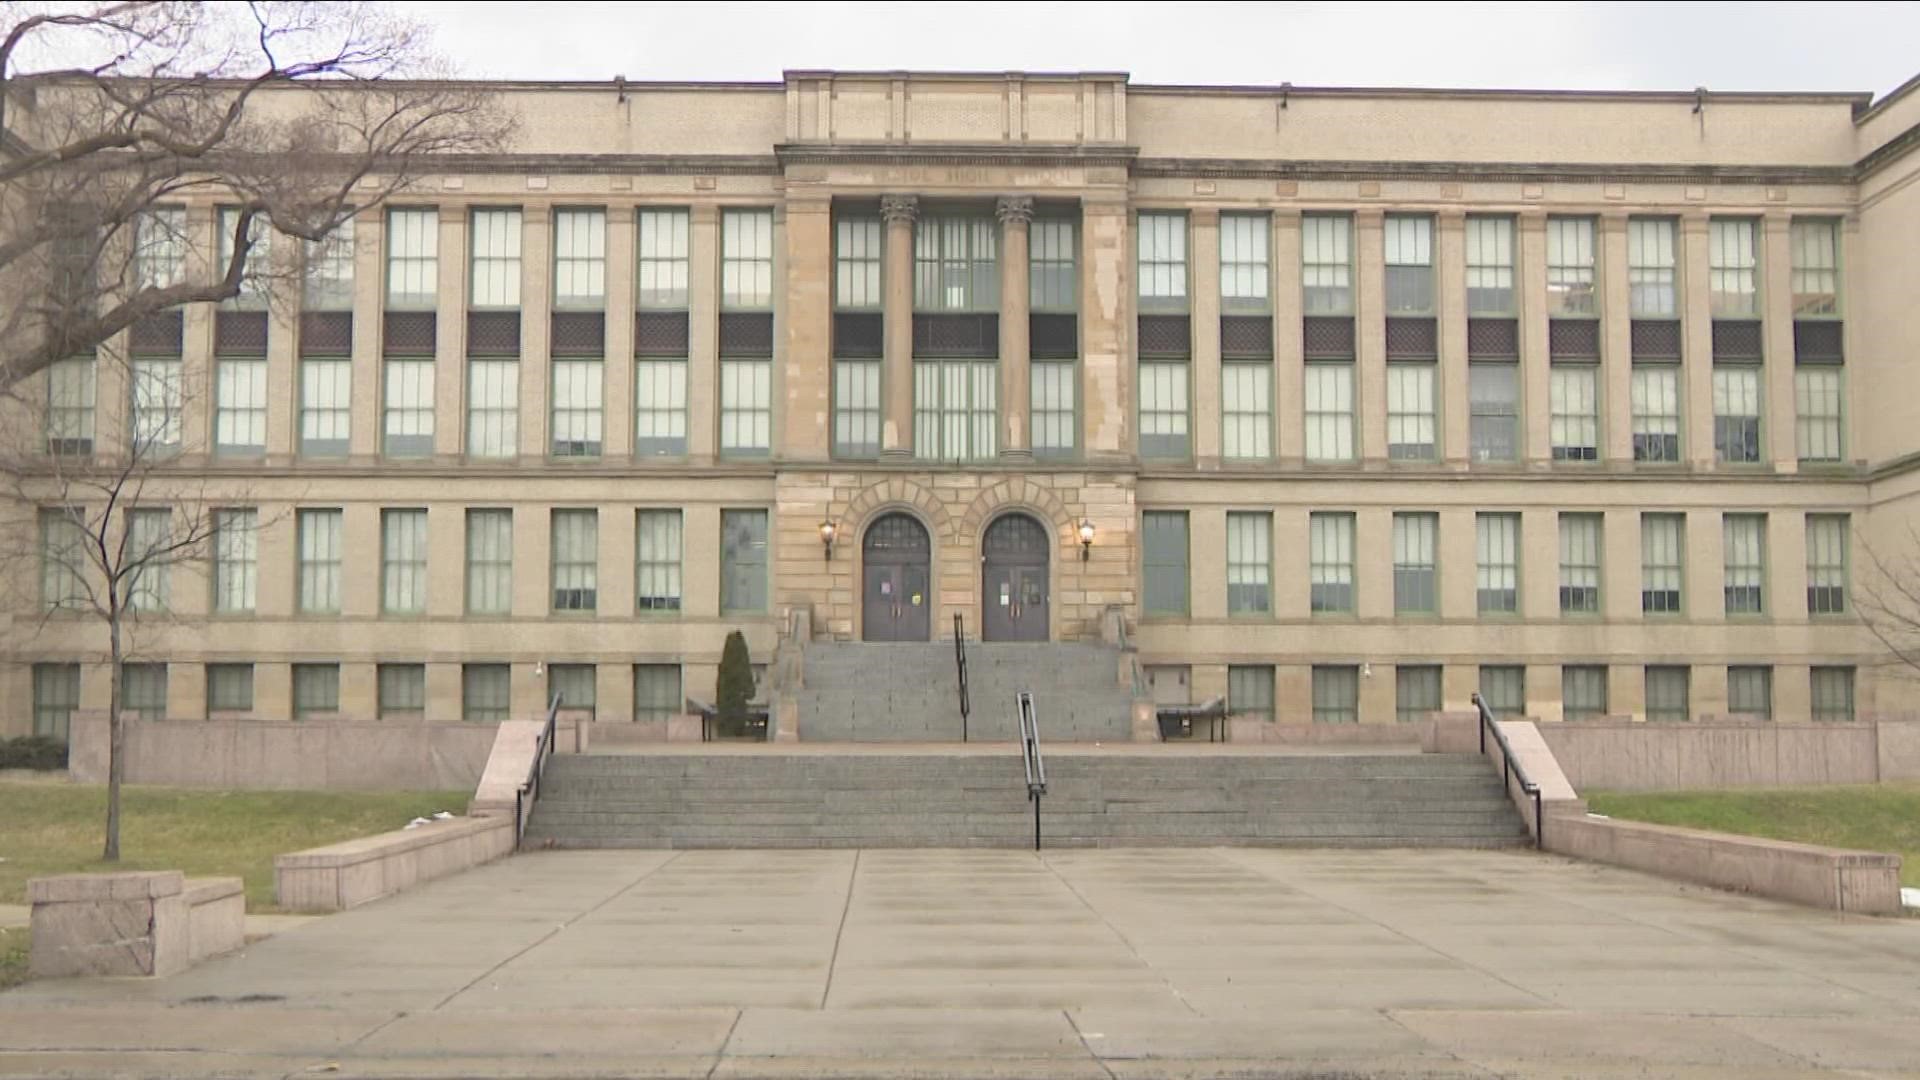 BPS students may see more police presence Wednesday at Riverside High.